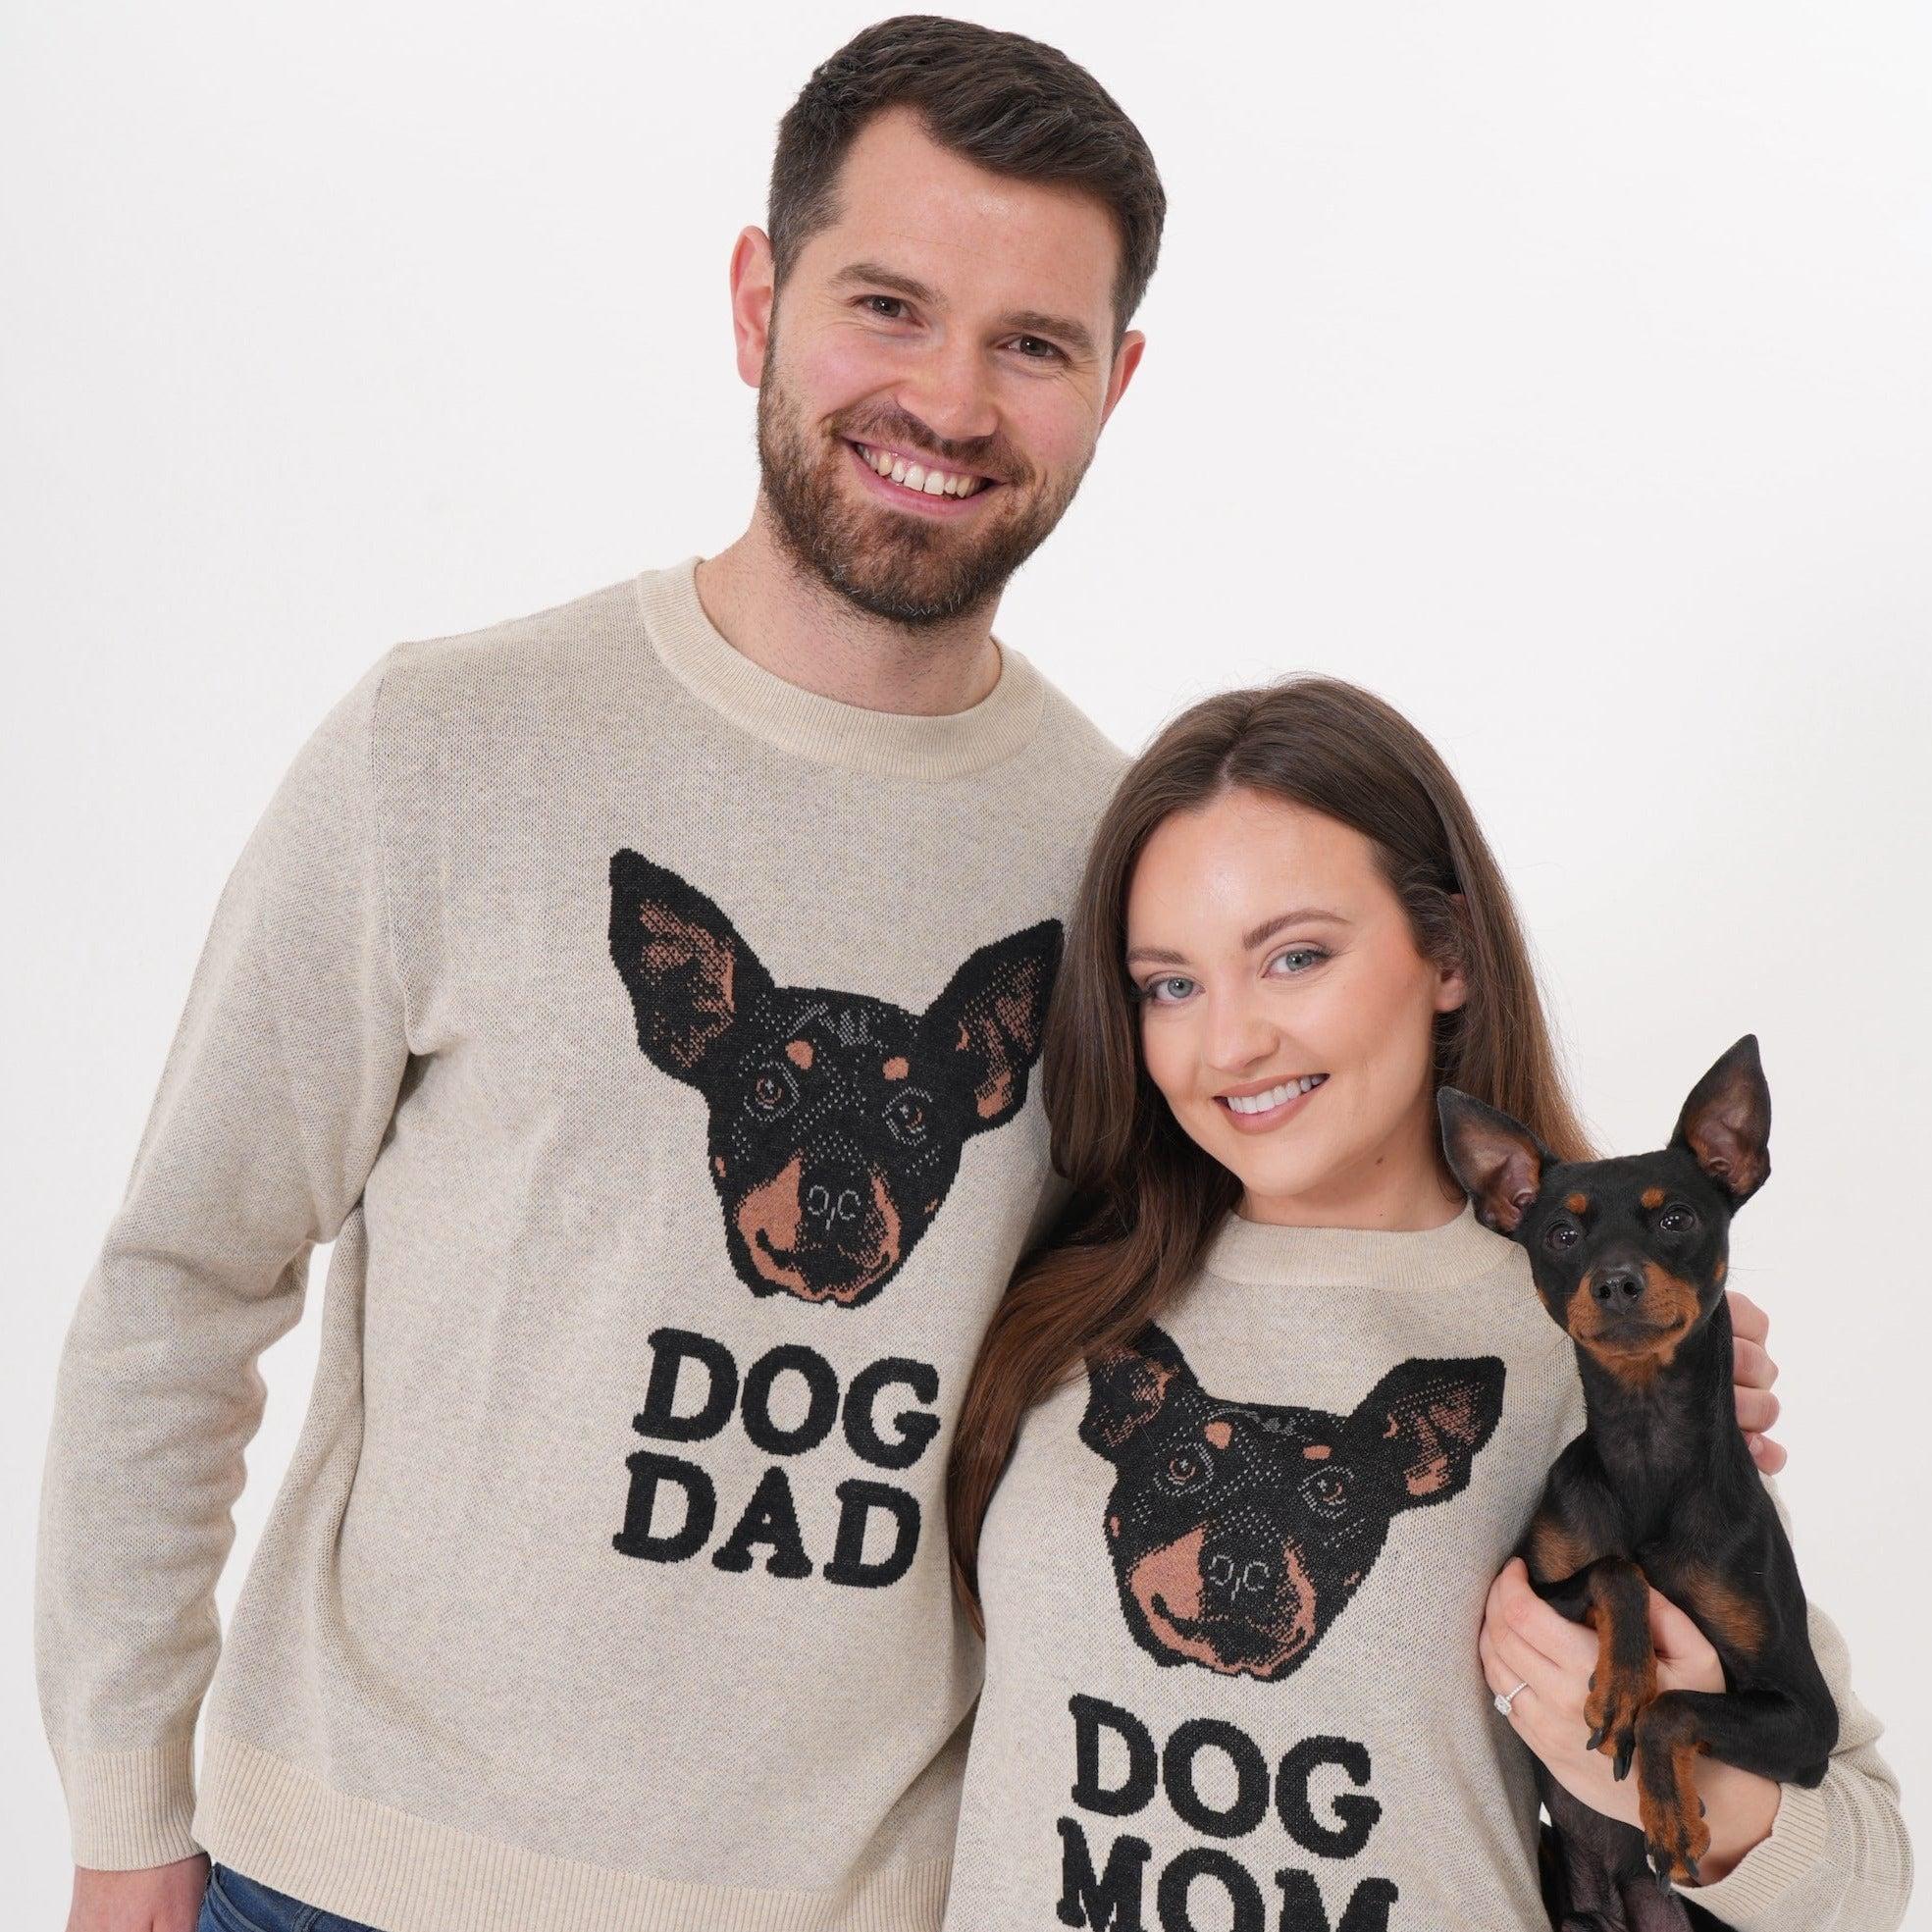 Crown and Paw - Knitwear Custom Knitted Dog Dad Text and Pet Face Sweater